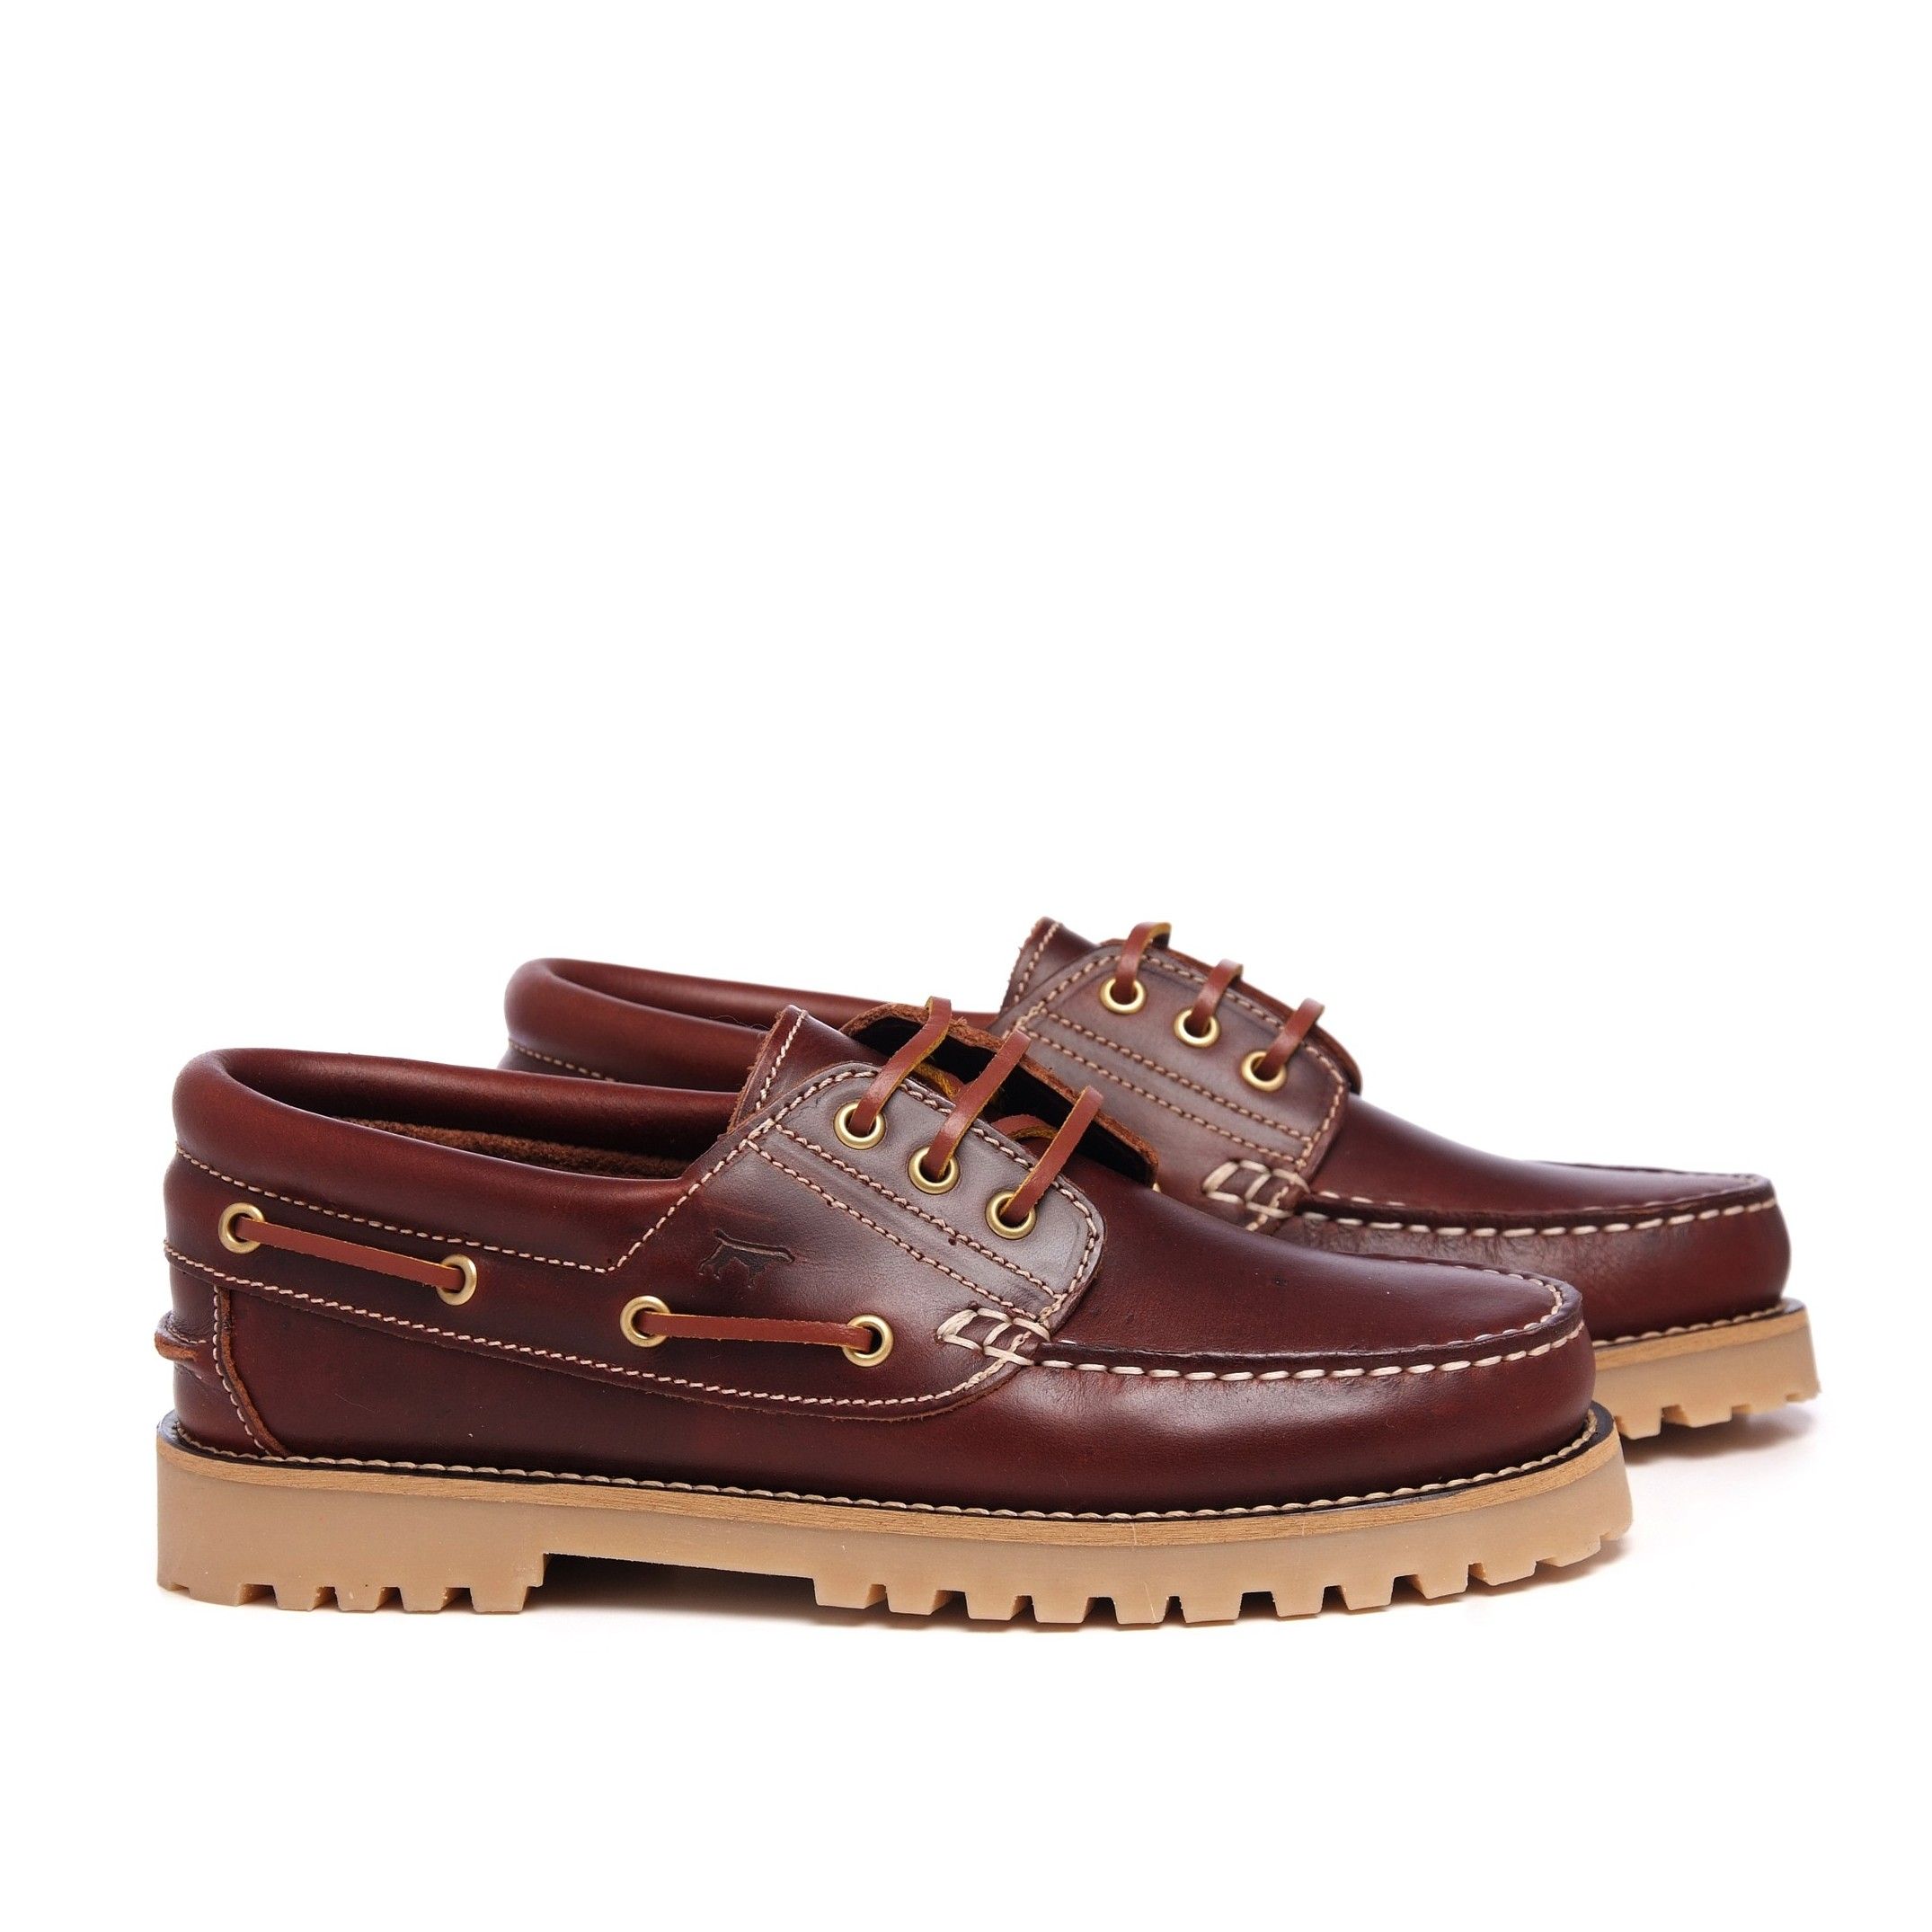 Leather Boat Shoes for Women Castellanisimos Comfort High Quality Shoe